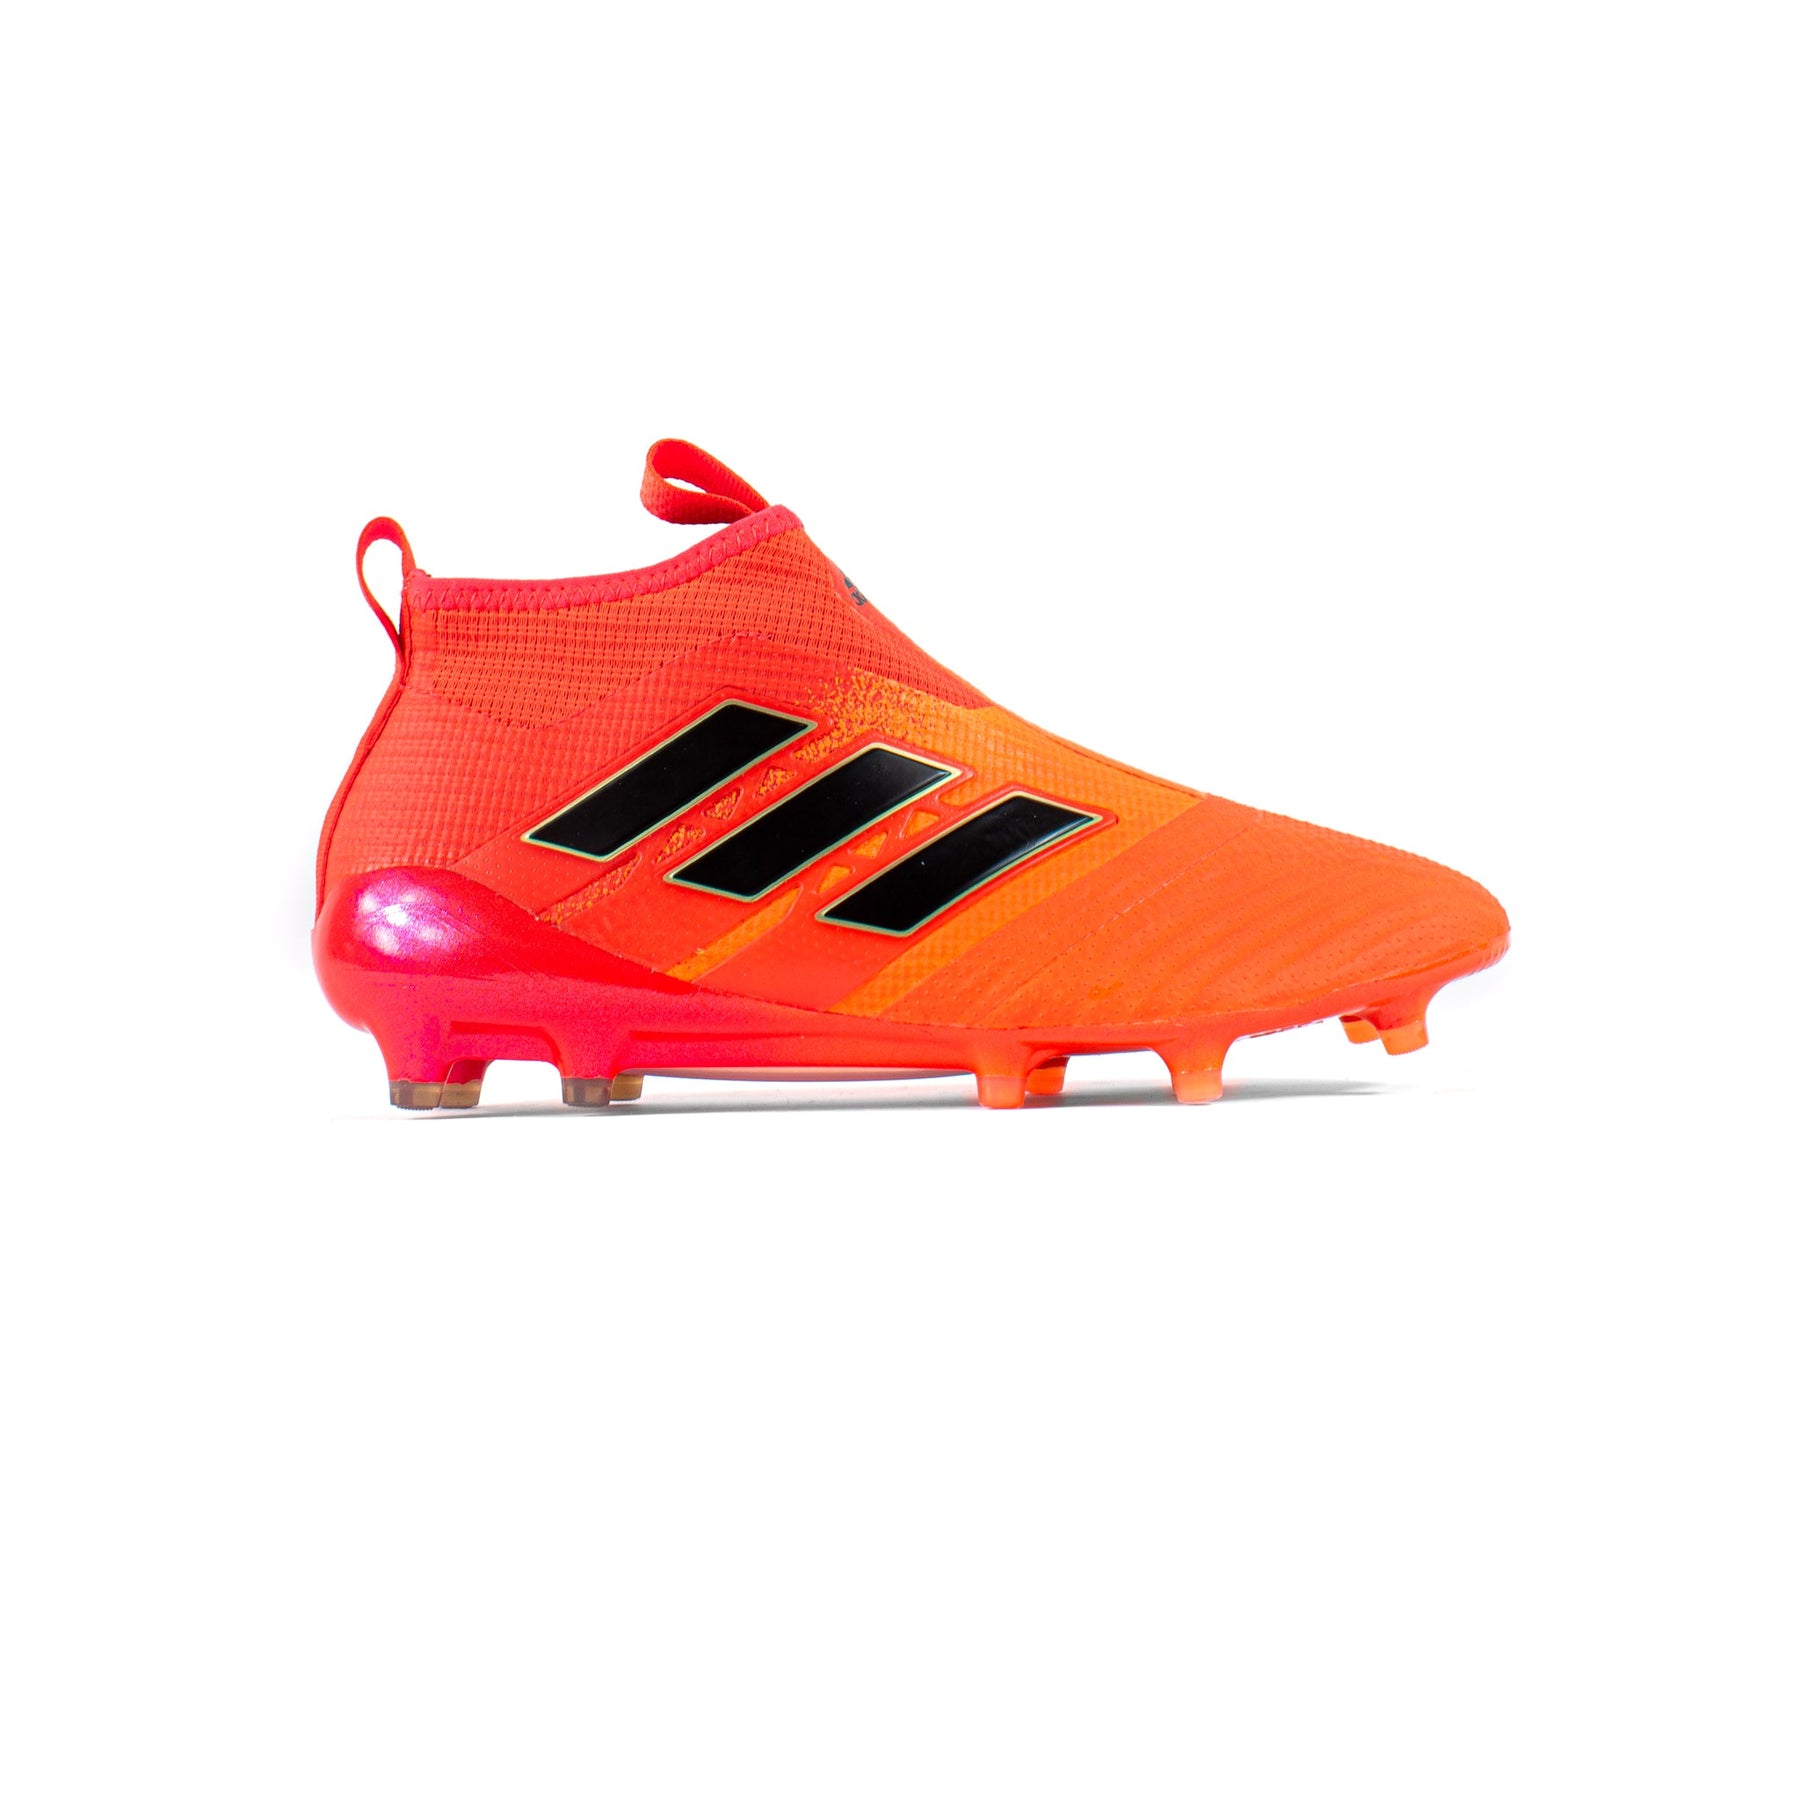 fremsætte kylling elev Adidas Ace 17+ PureControl Red FG – Classic Soccer Cleats